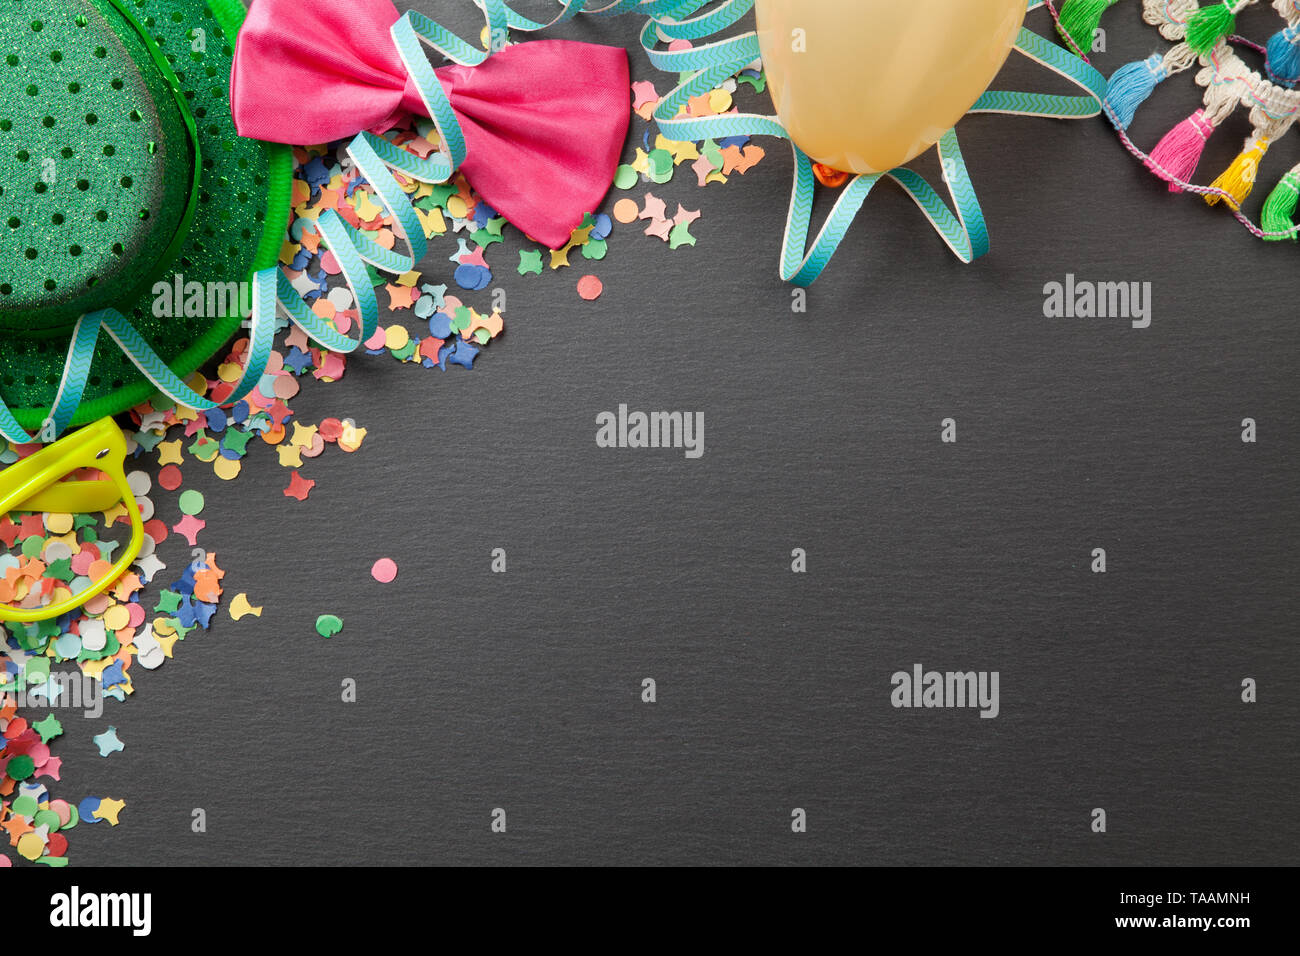 Carnival party background with confetti and costume accessories Stock Photo